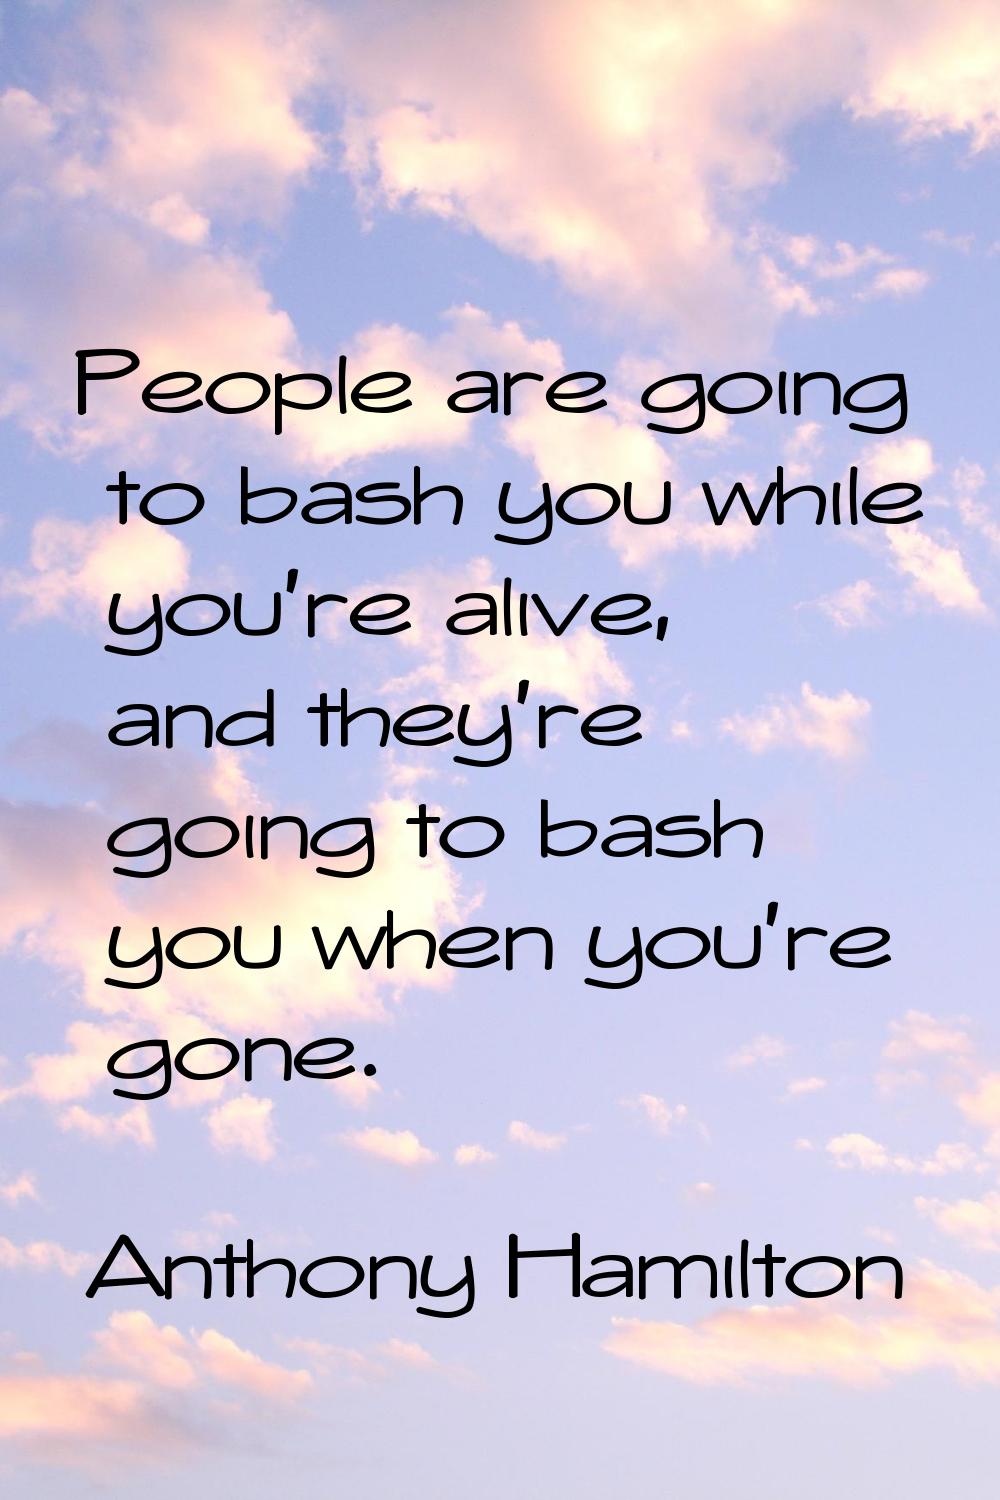 People are going to bash you while you're alive, and they're going to bash you when you're gone.